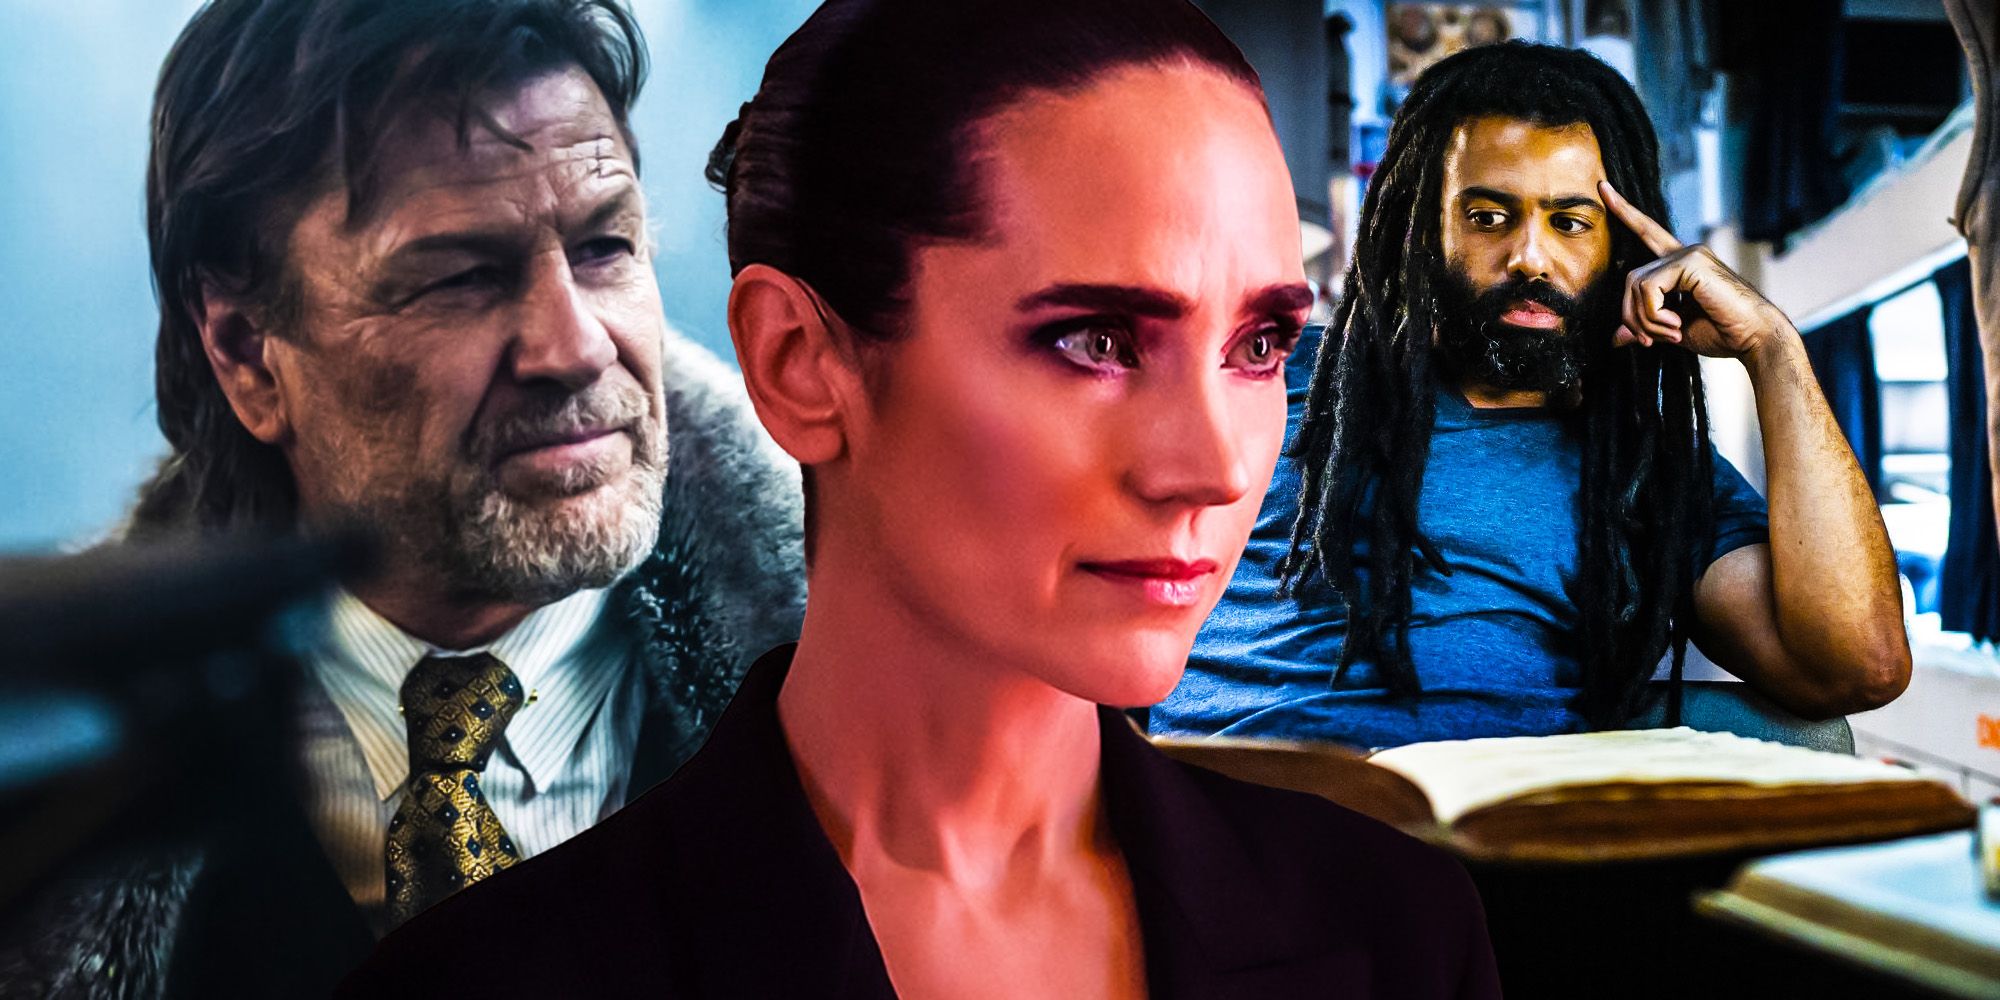 Snowpiercer Season 4 Is Already Repeating The Show's 2 Biggest Gambles